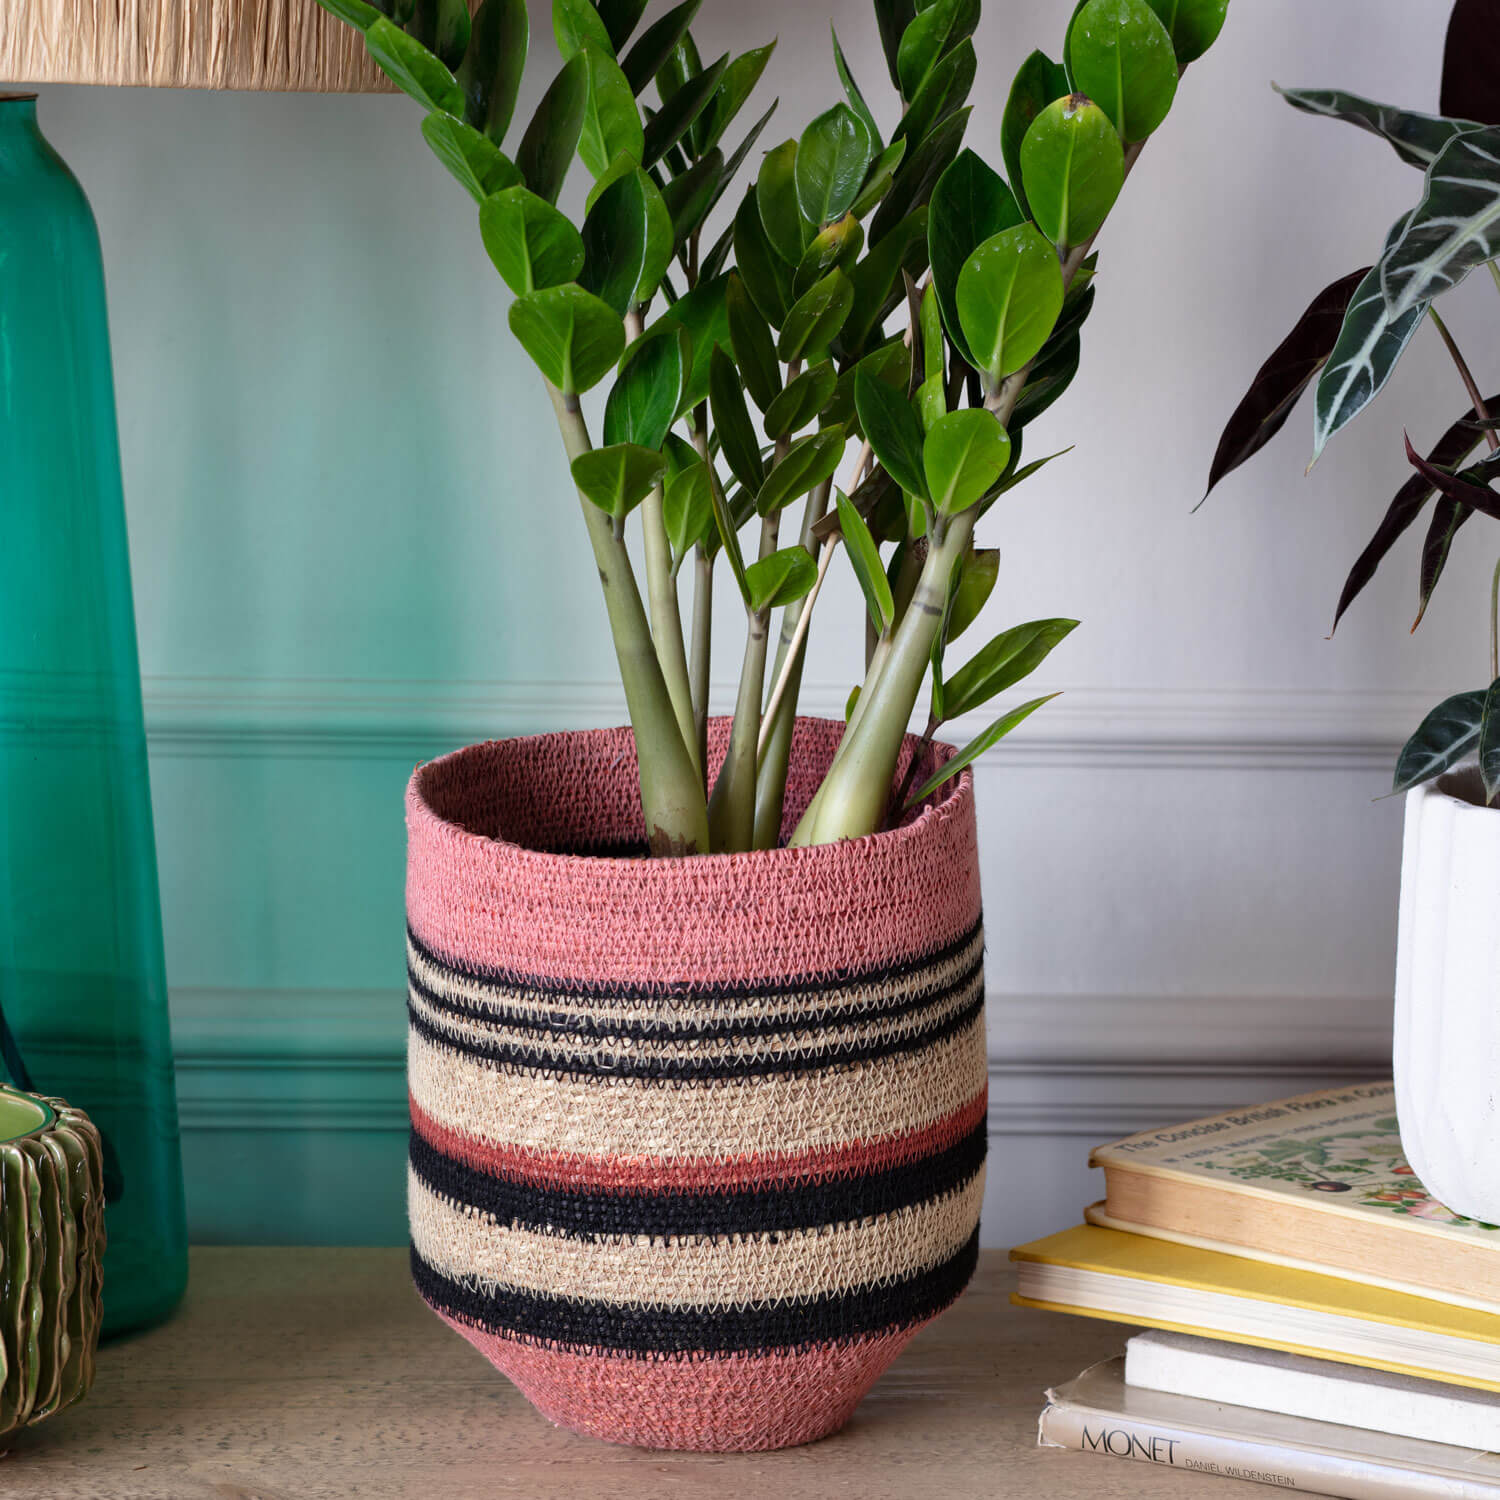 Read more about Graham and green striped pink and black basket